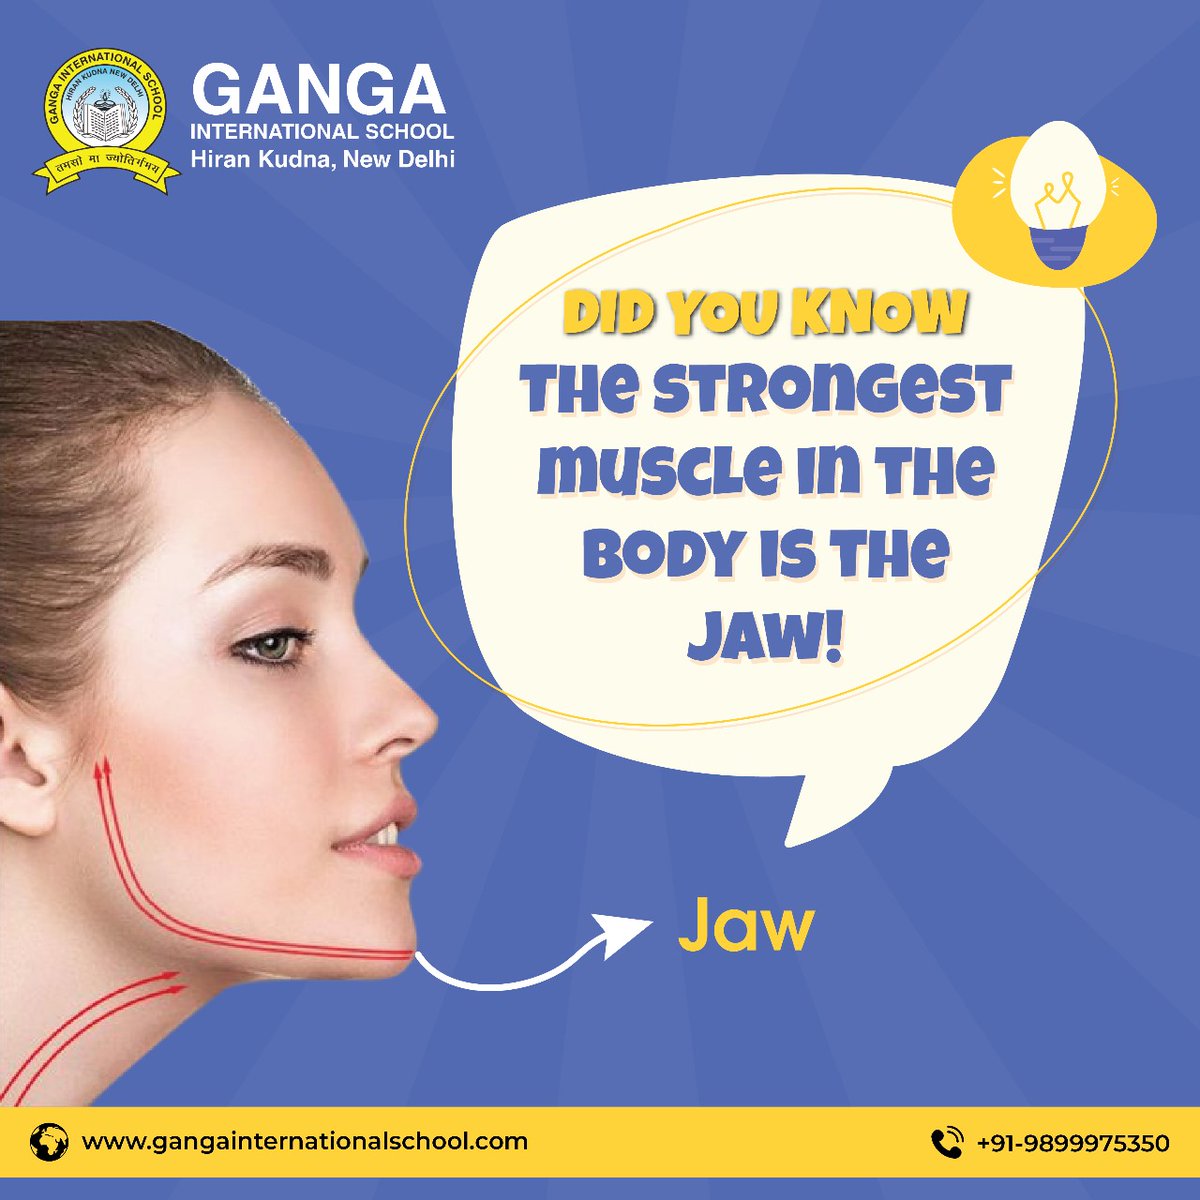 Jaw-dropping fact!
💪🦷 It's a powerhouse, helping you chomp through life one bite at a time. 🍔🌮
.
.
.
#didyouknow #facts #knowledgeoftheday #jawfact #gis #gisstudents #bestschool #besteducation #growwithgis  #didyouknowthat #boardingschool #topboardingschoolinnewdel